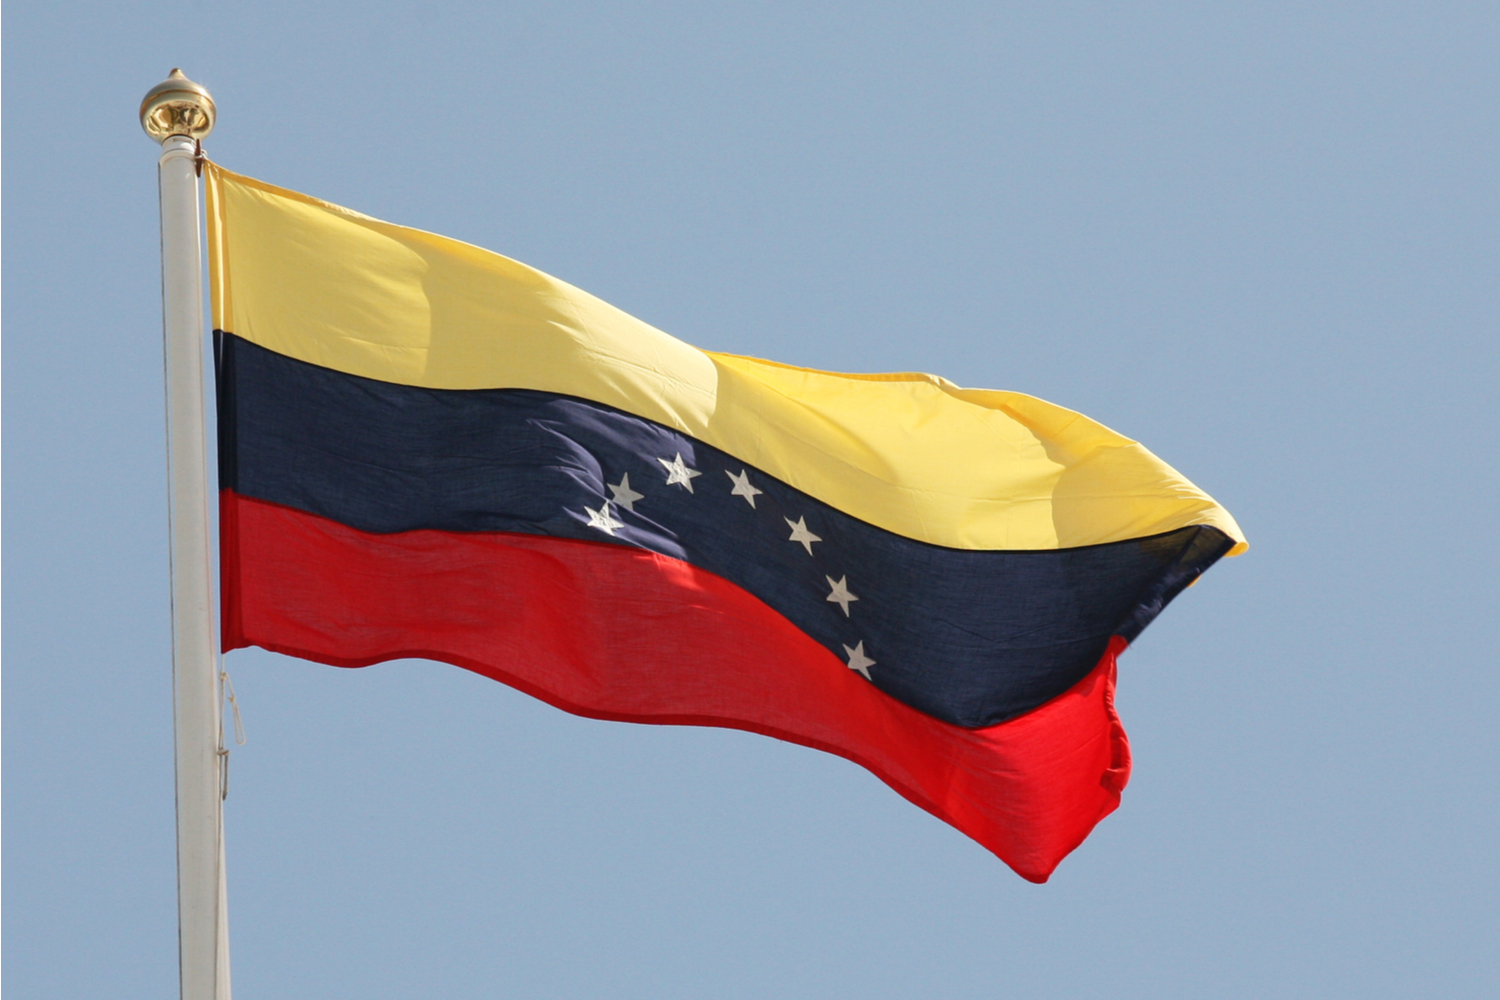 Venezuelan Pharmacy Chain To Accept Cryptocurrency Payments